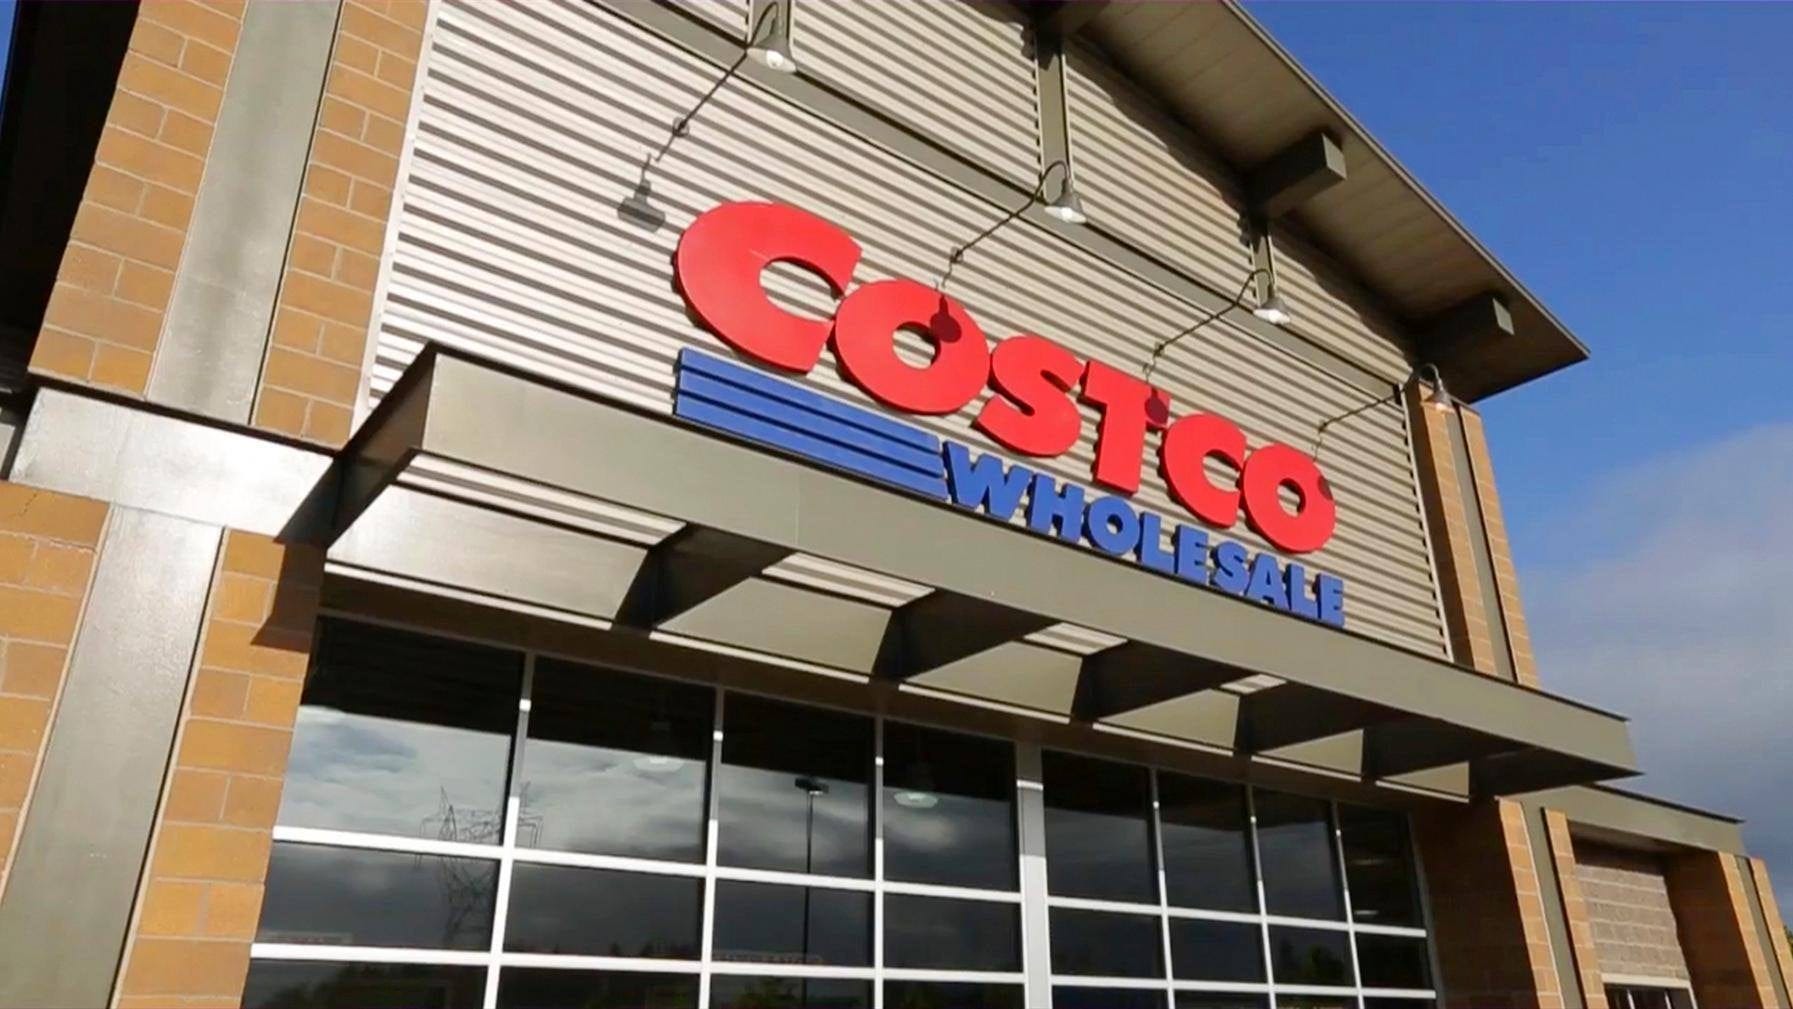 costco to return to normal hours require face masks starting monday require face masks starting monday